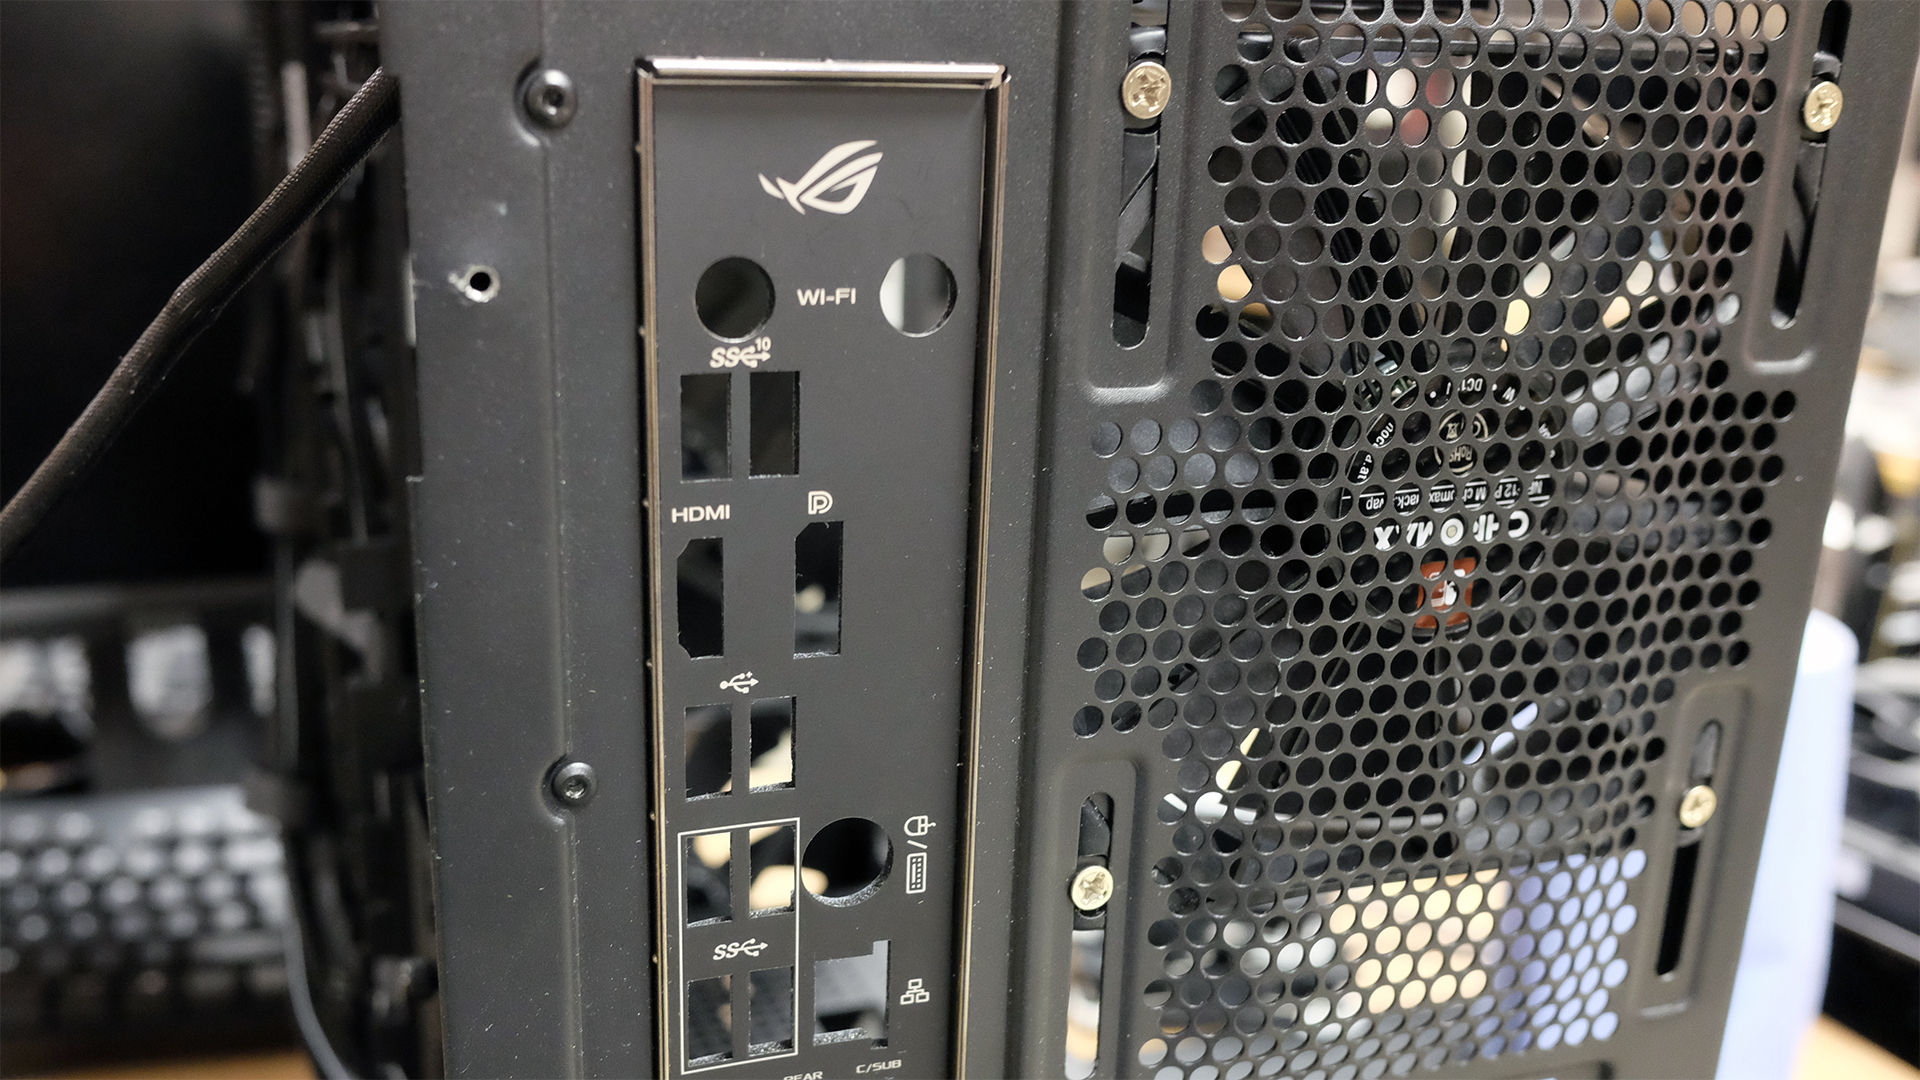 The back panel of a PC case